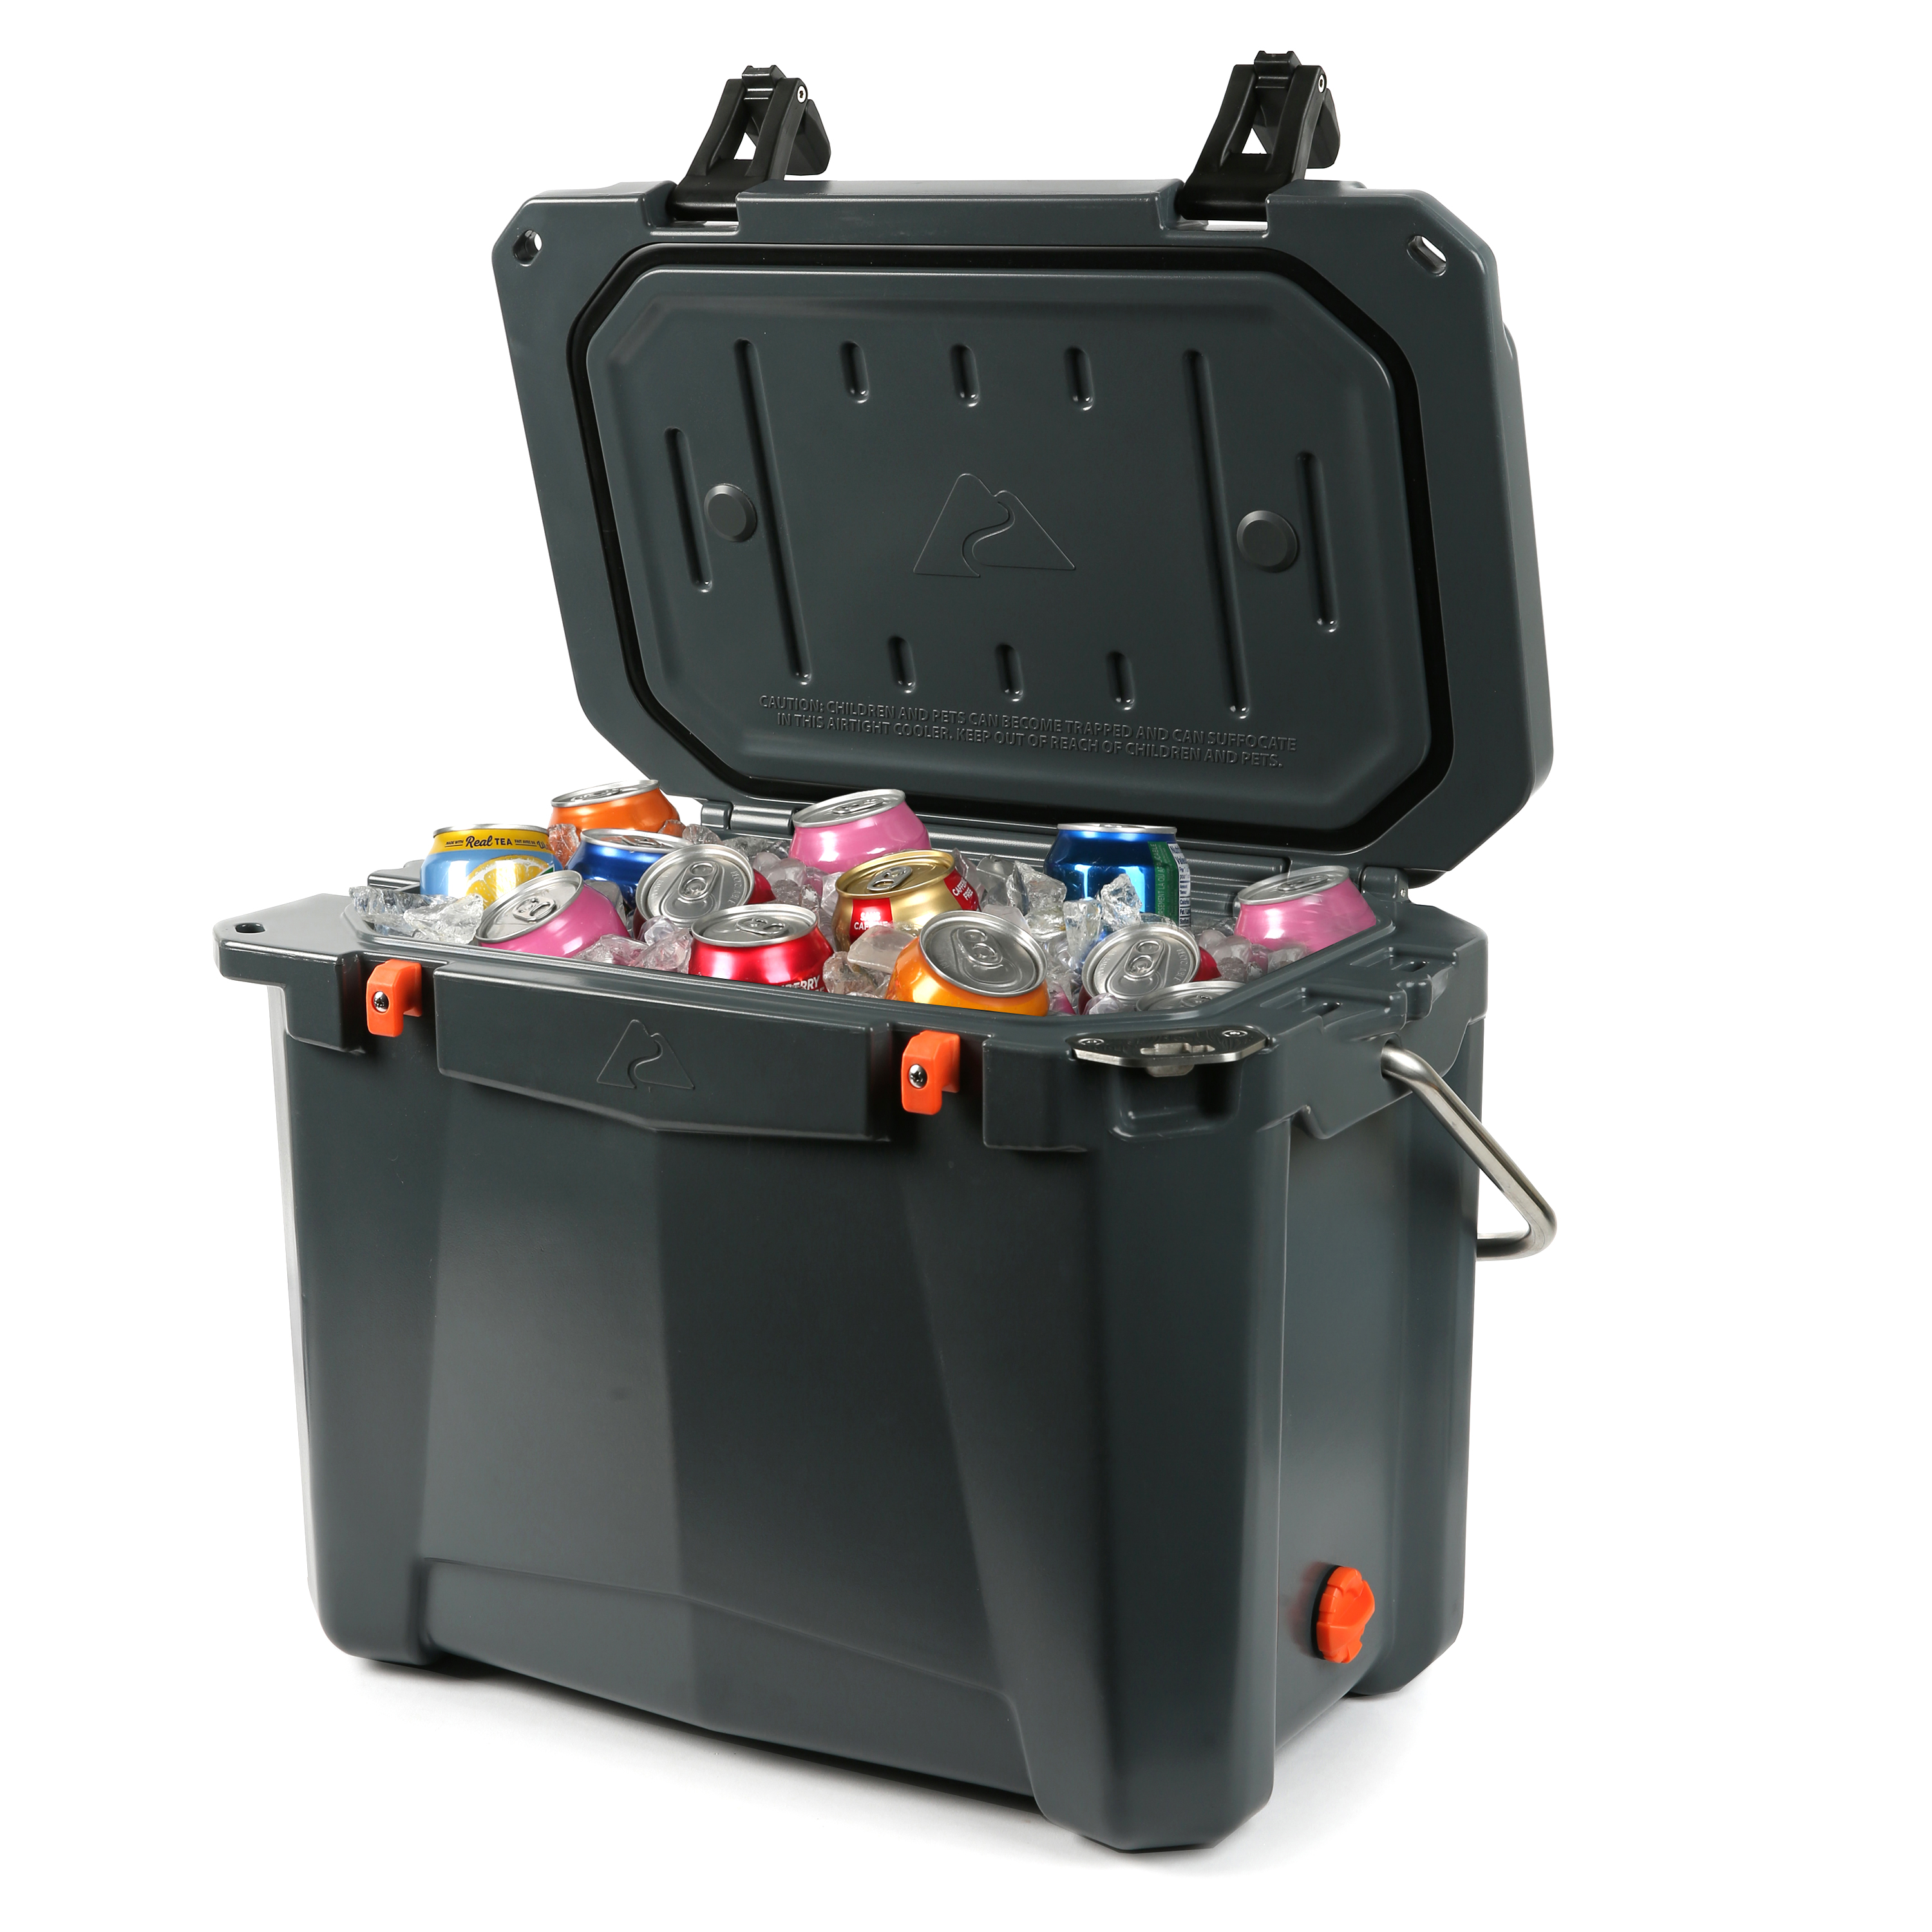 Ozark Trail 26 Quart High Performance Roto-Molded Cooler with Microban®, Gray - image 4 of 12